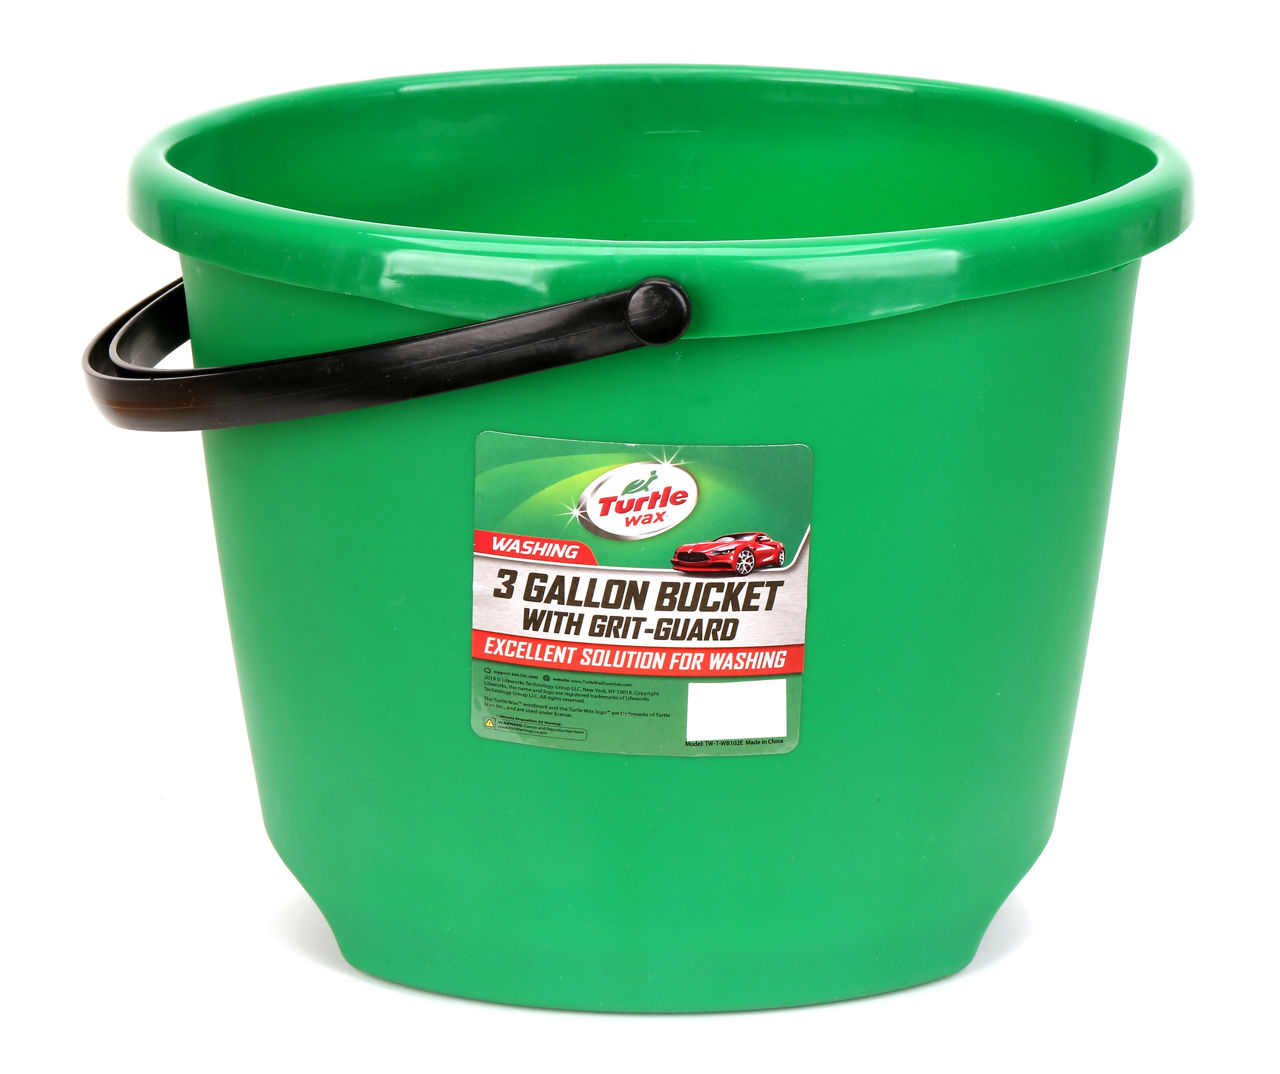 Car Wash Bucket with Grit Guard